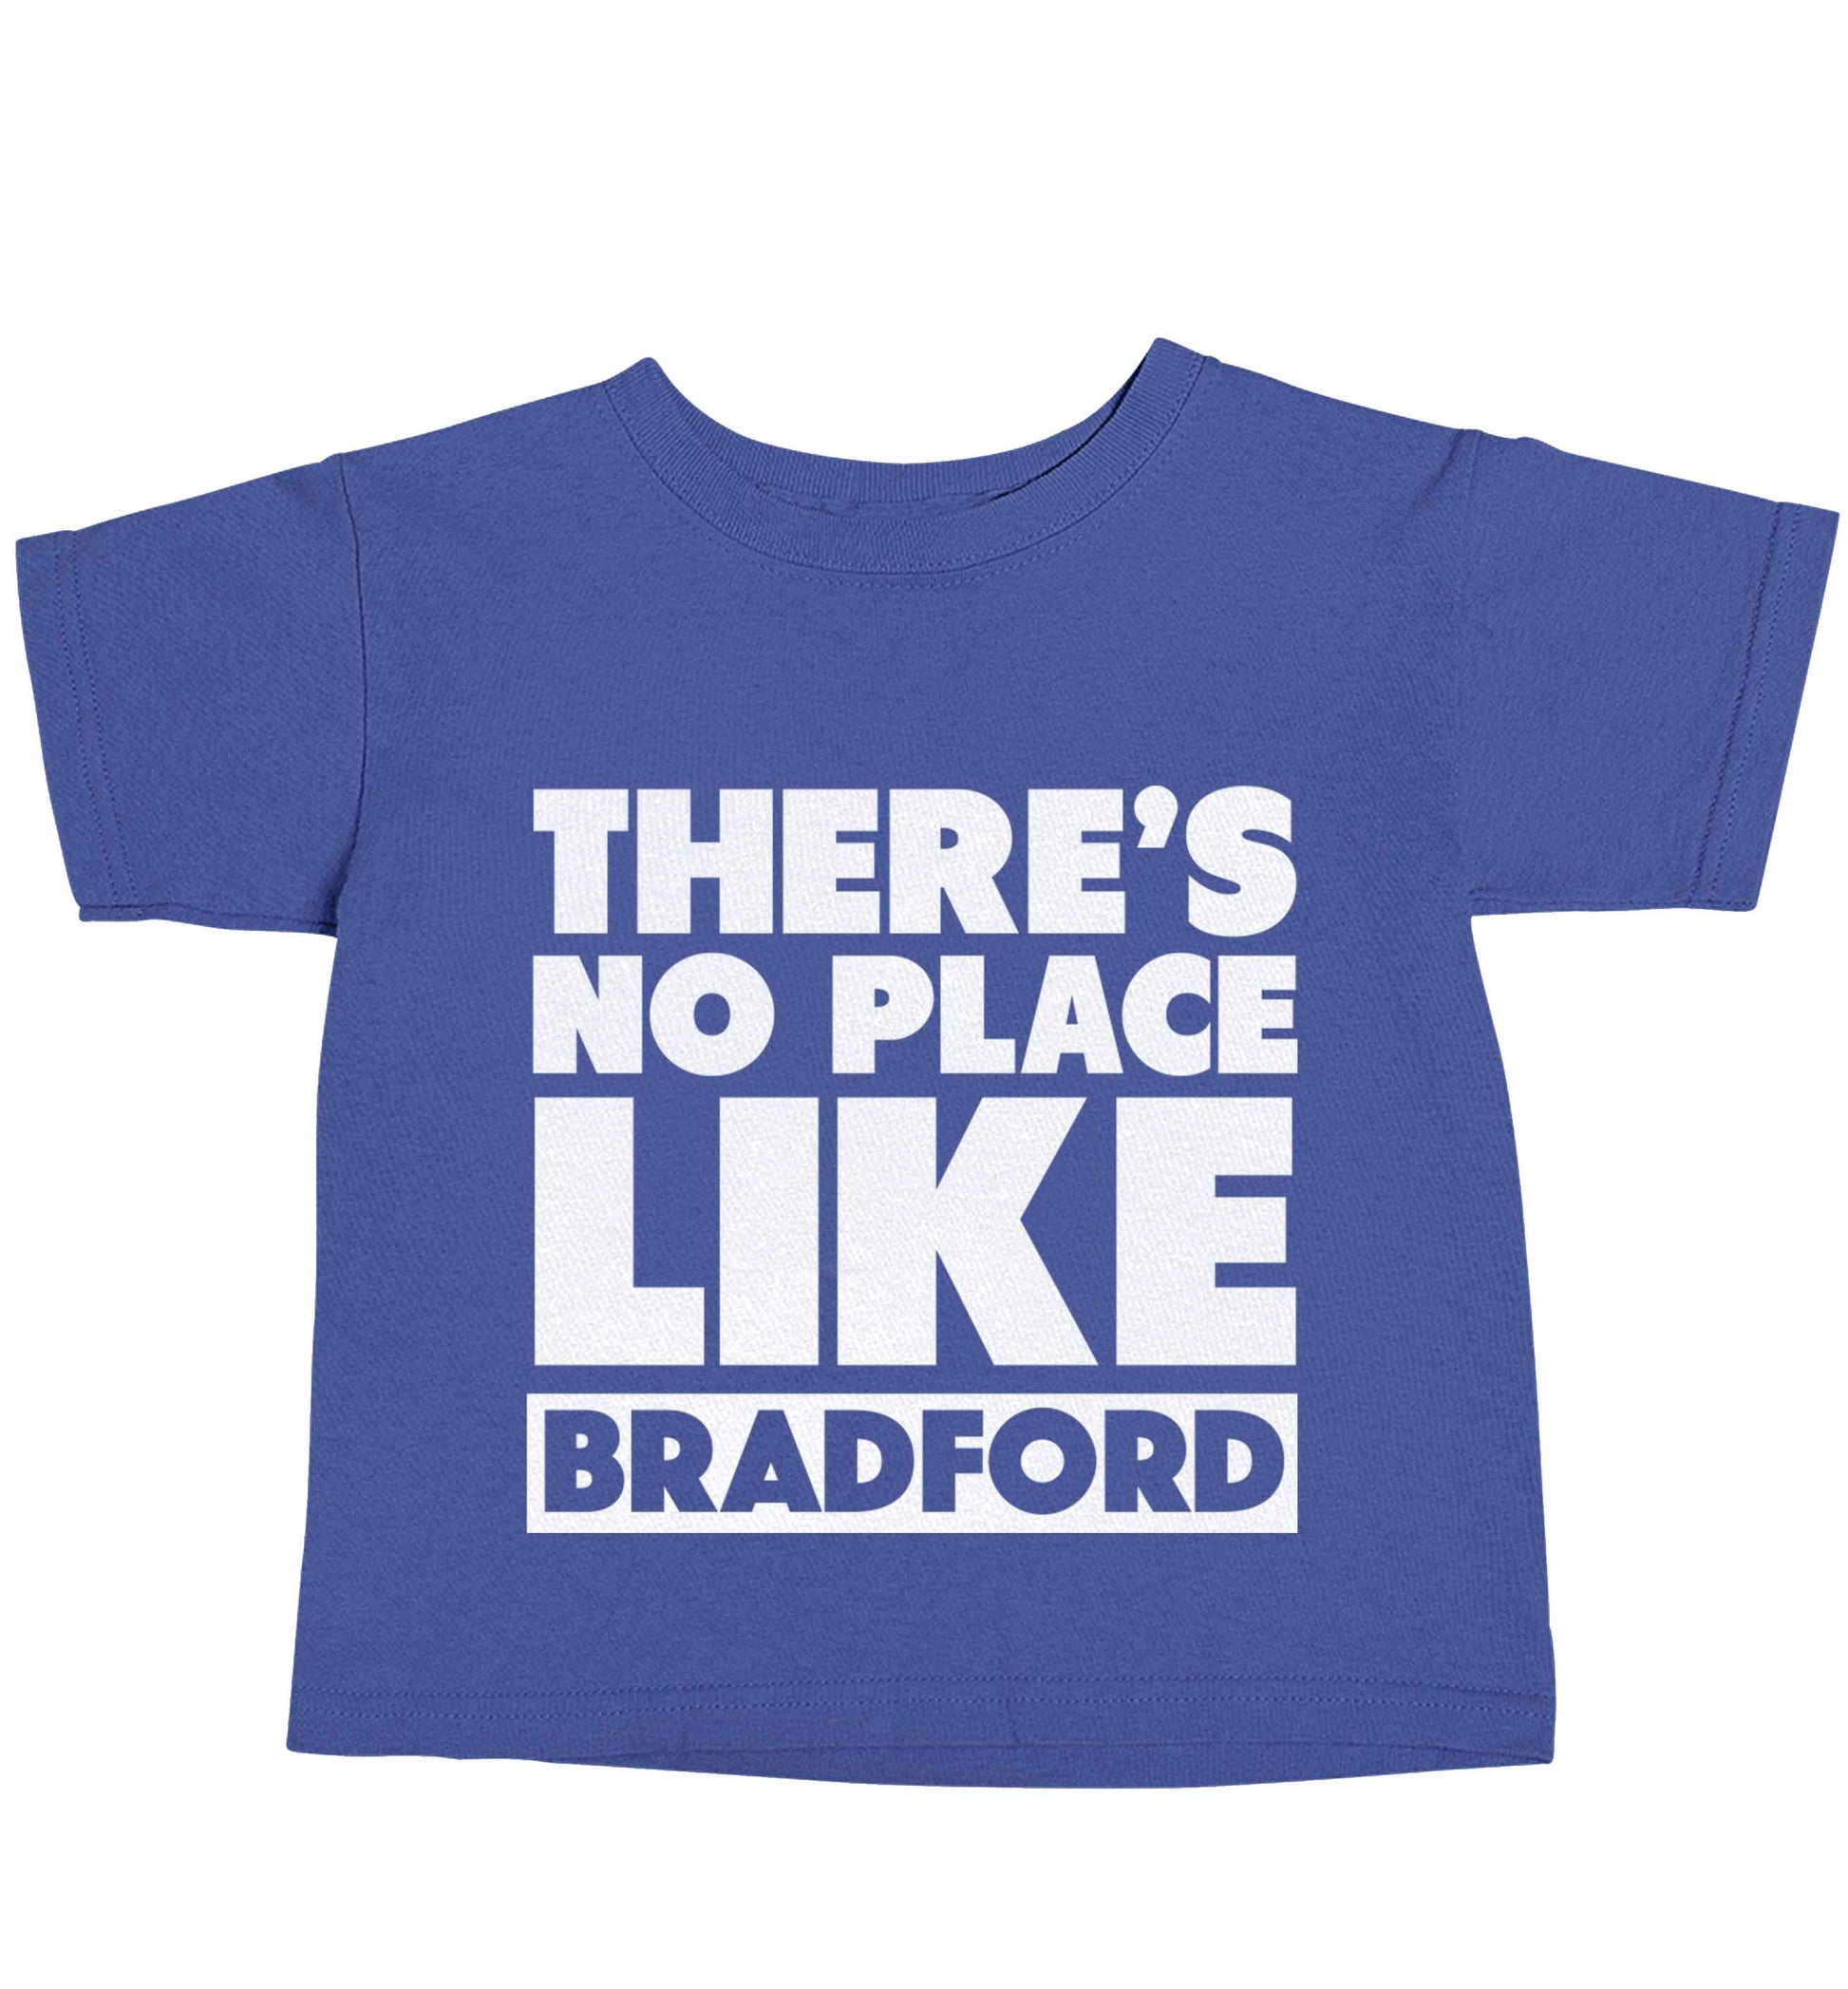 There's no place like Bradford blue baby toddler Tshirt 2 Years